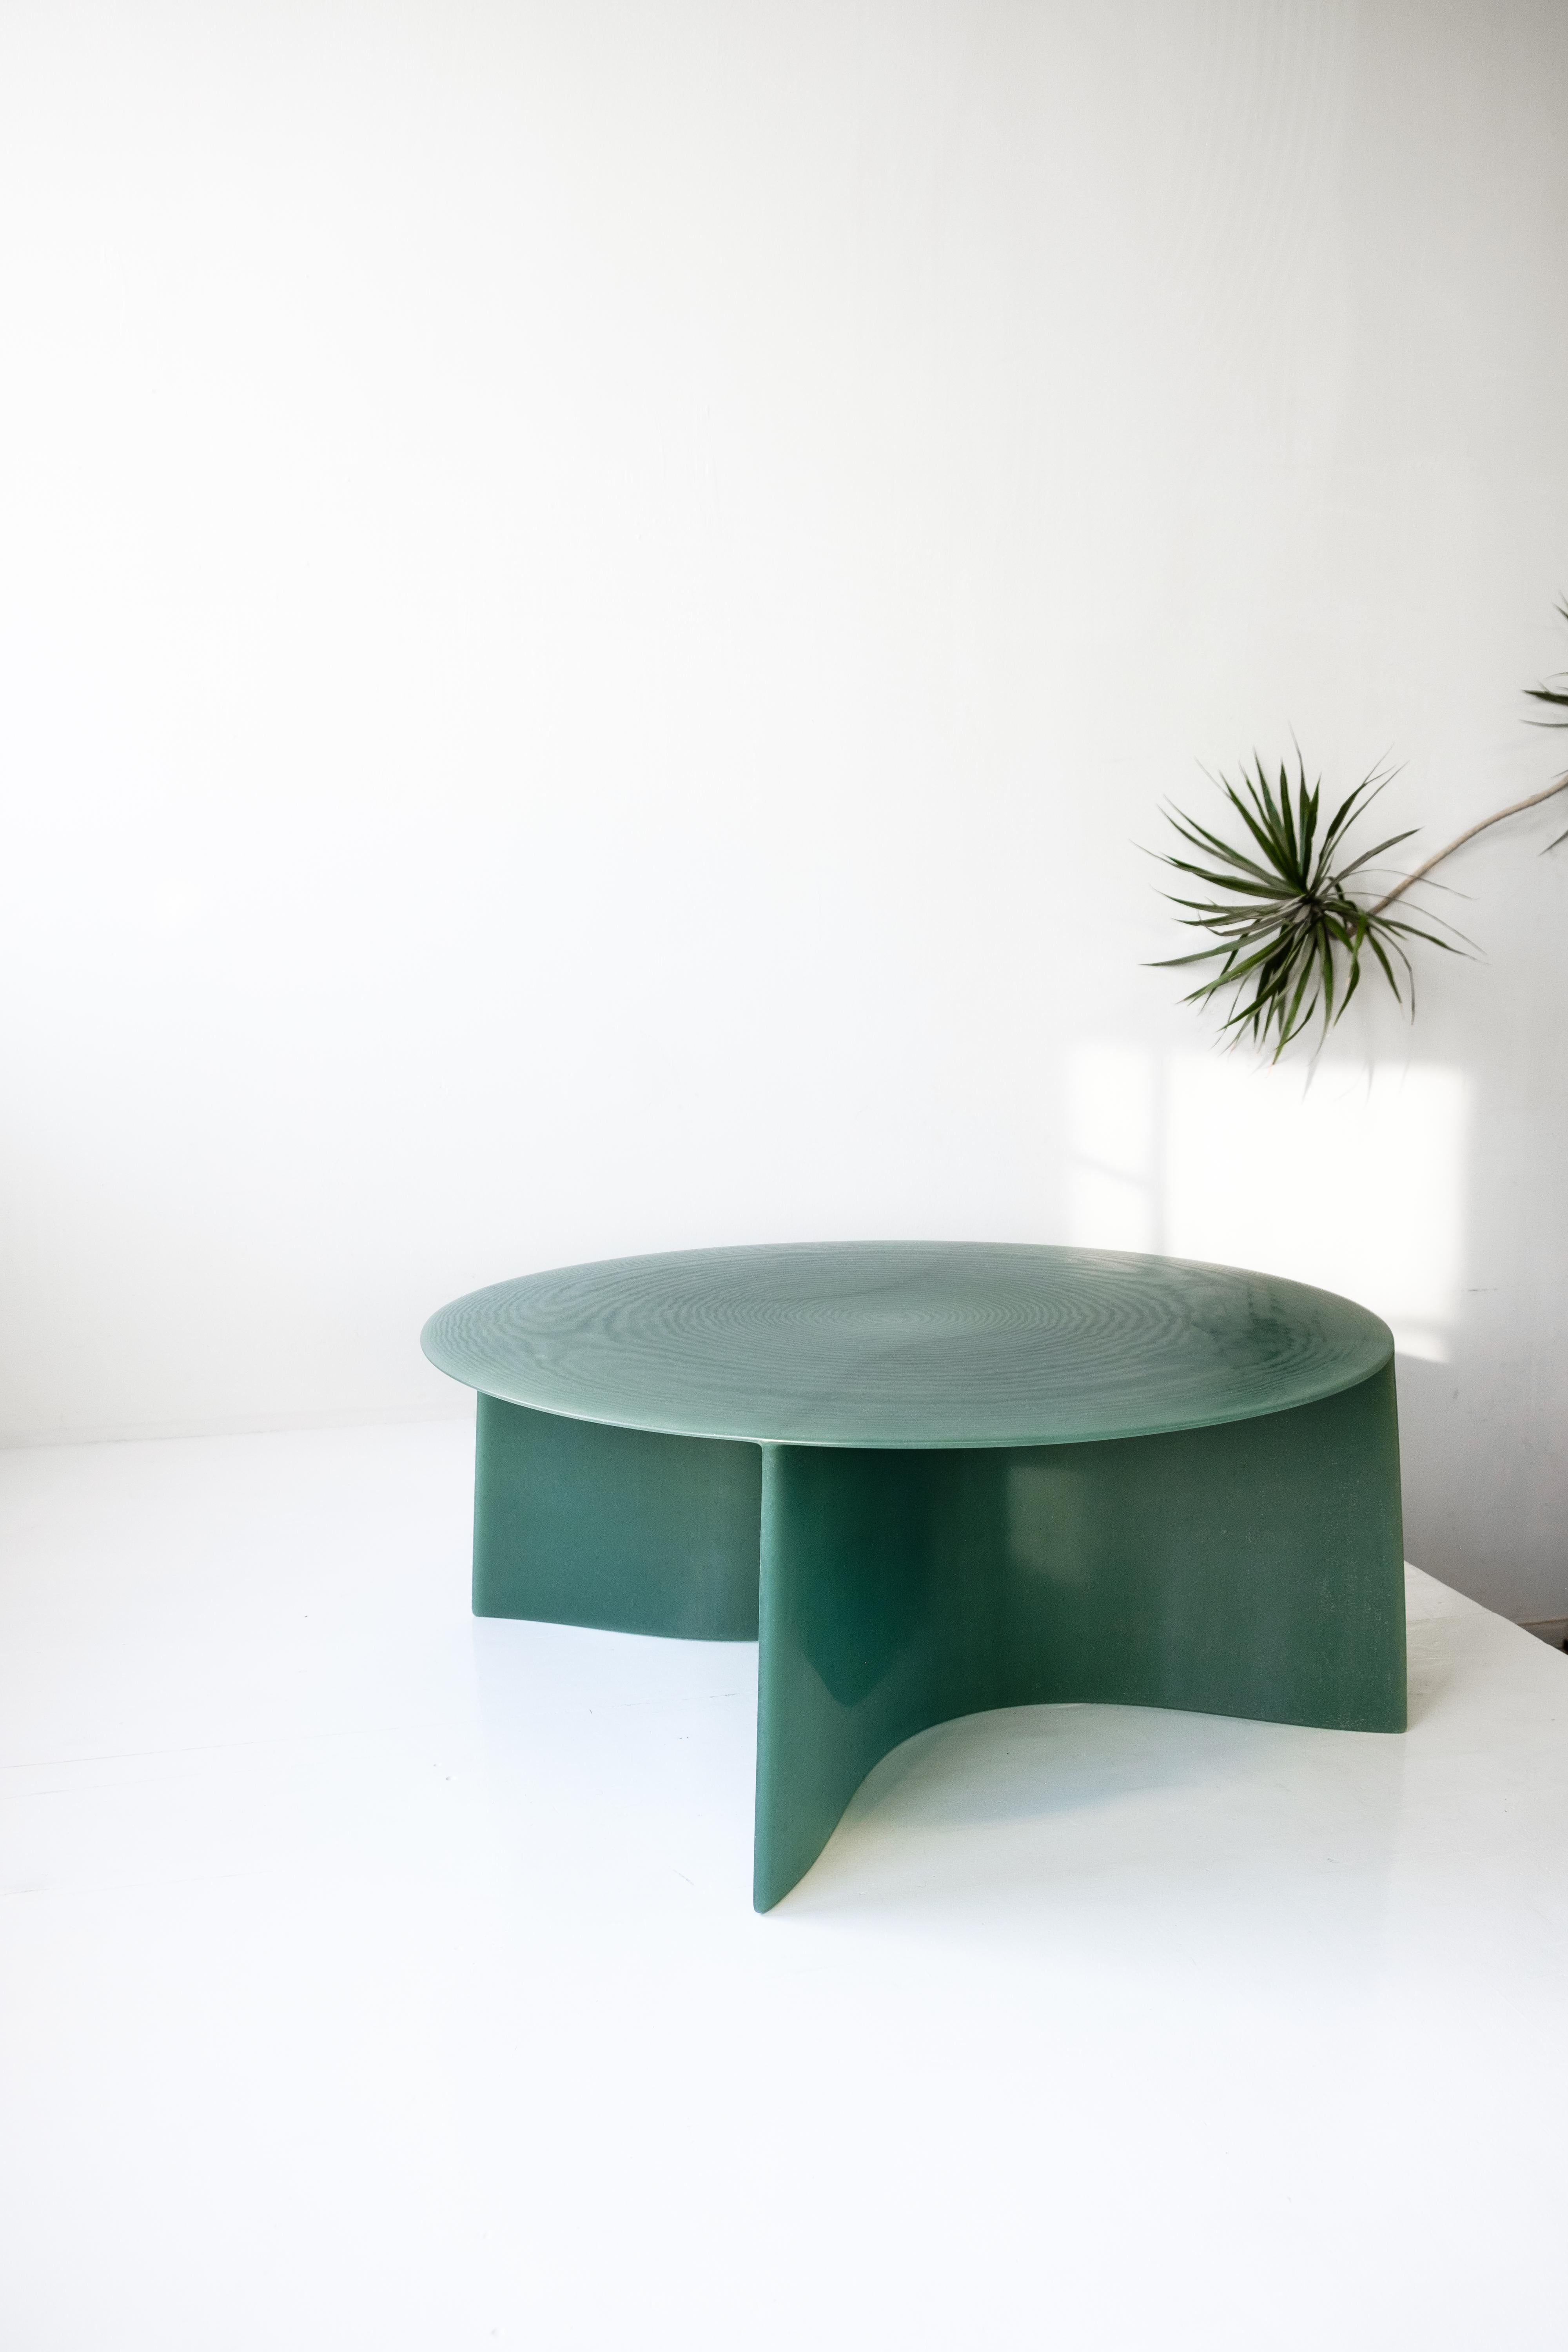 Contemporary Green Fiberglass, New Wave Coffee Table Round 120cm, by Lukas Cober 6